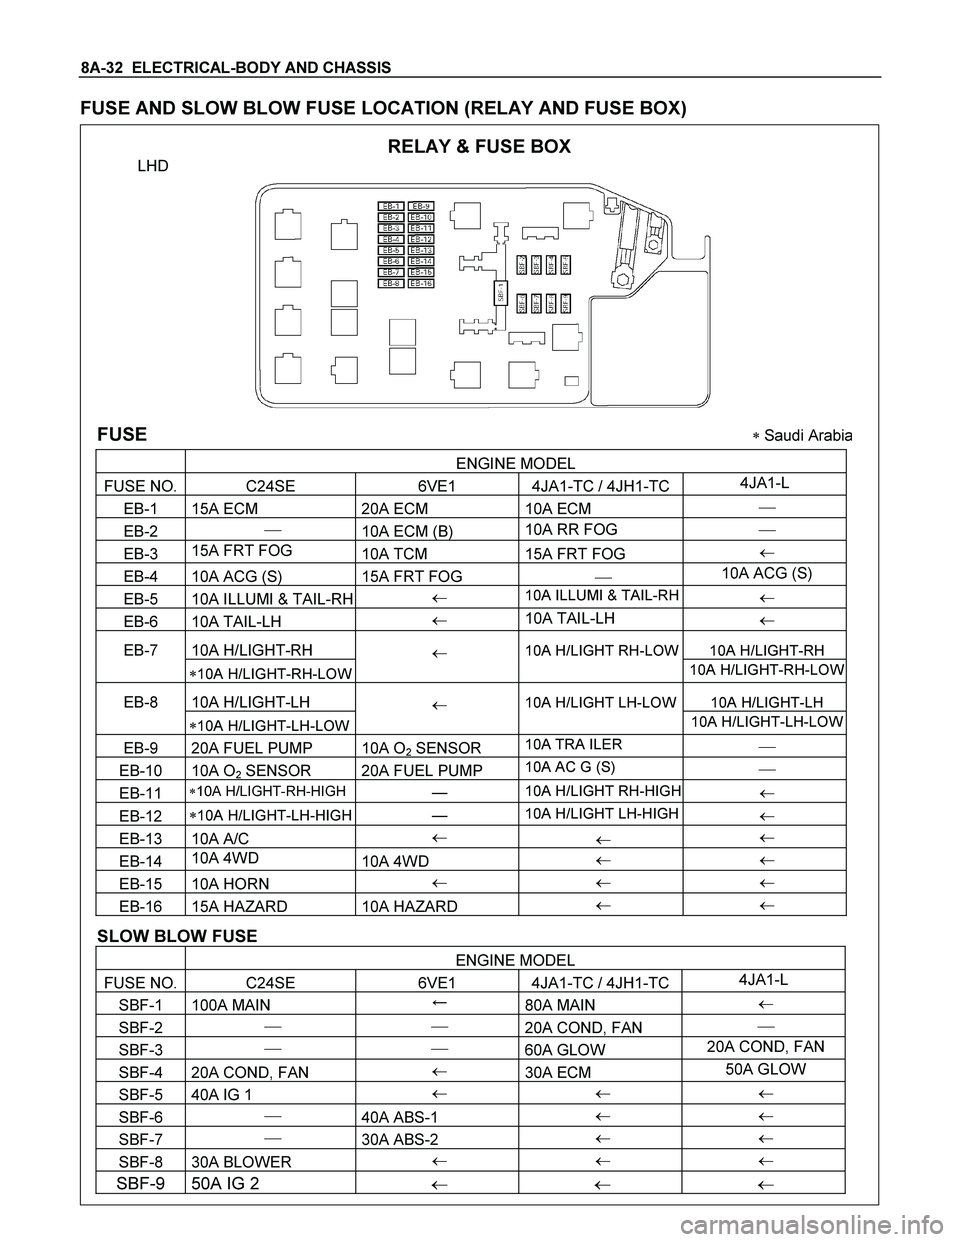 ISUZU TF SERIES 2004  Workshop Manual 8A-32  ELECTRICAL-BODY AND CHASSIS 
FUSE AND SLOW BLOW FUSE LOCATION (RELAY AND FUSE BOX) 
 RELAY & FUSE BOX 
LHD 
 
FUSE  Saudi Arabia
 ENGINE MODEL 
FUSE NO.  C24SE  6VE1  4JA1-TC / 4JH1-TC4JA1-L 
